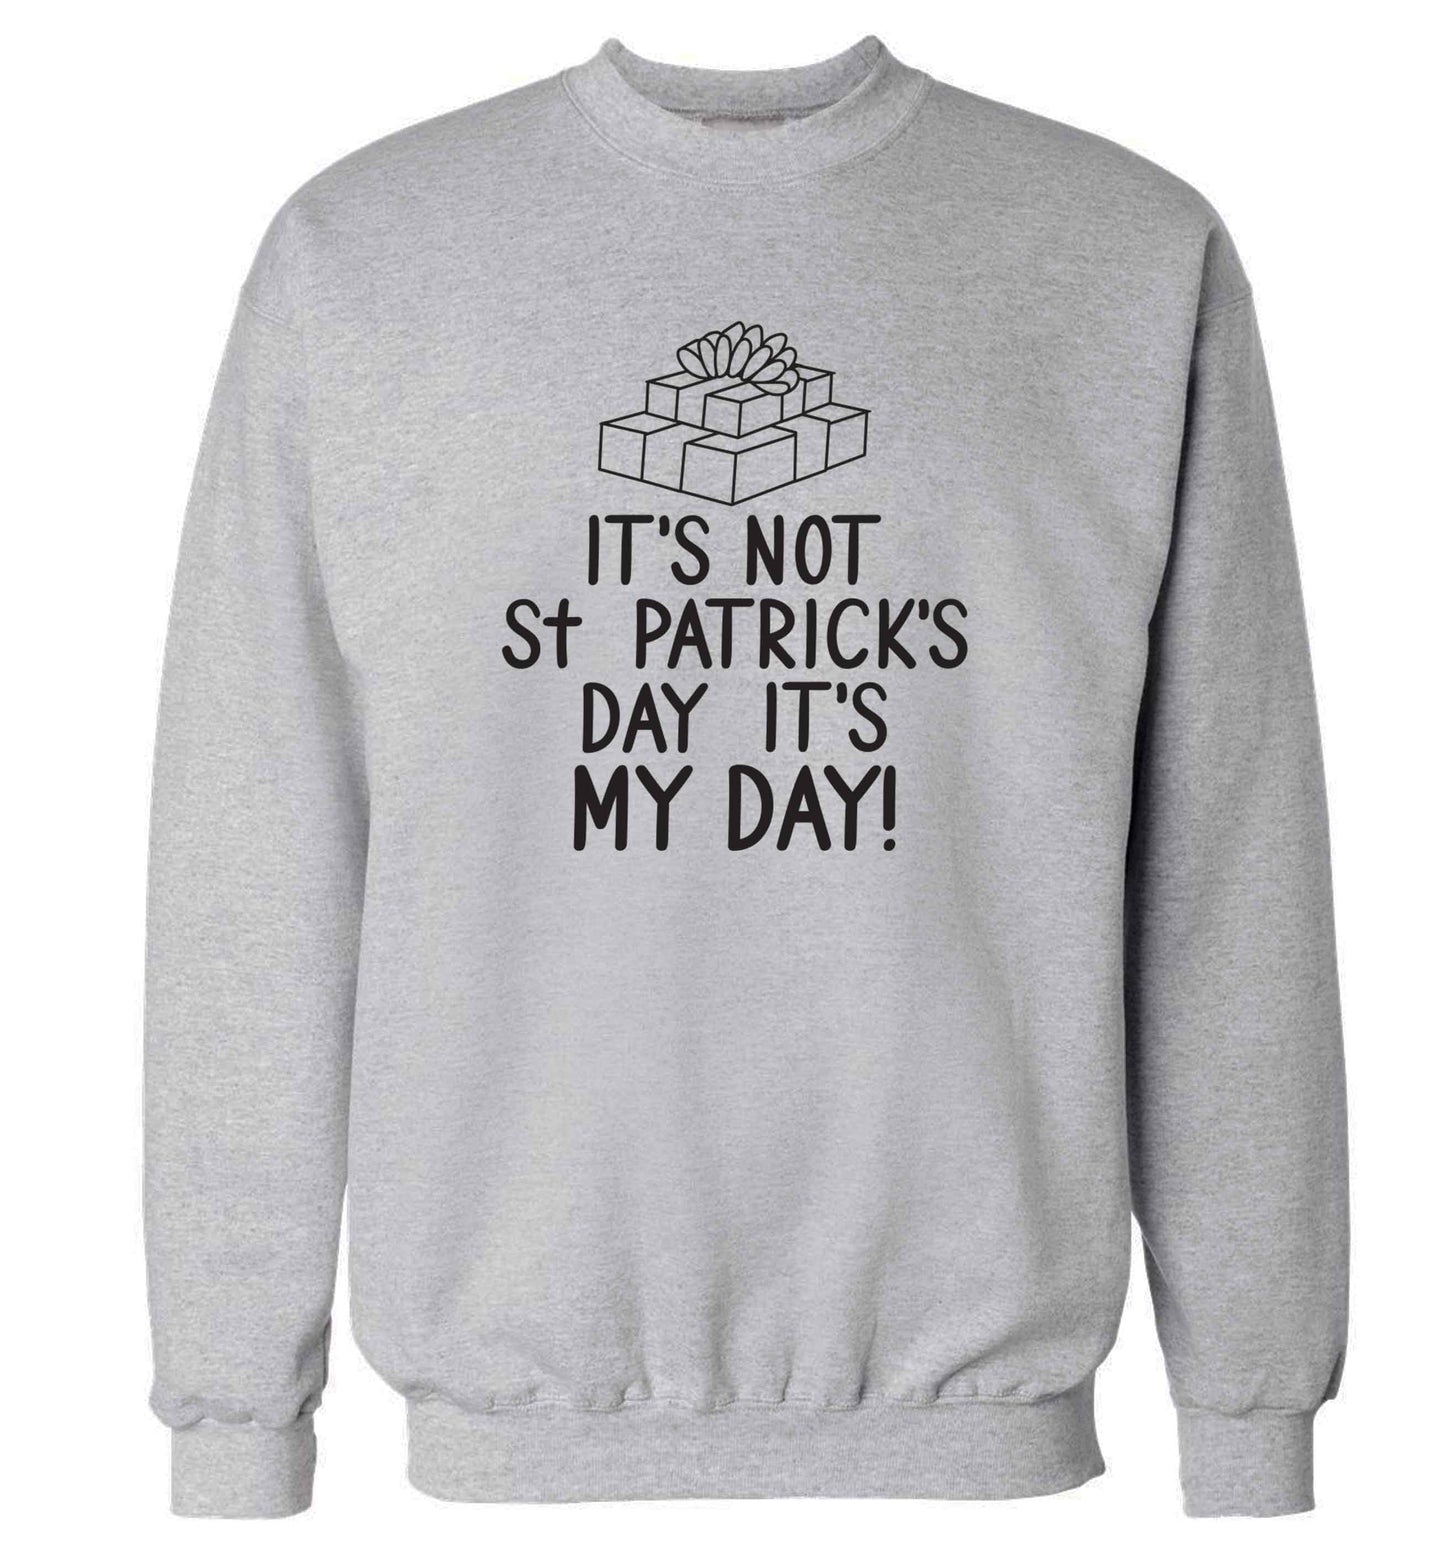 Funny gifts for your mum on mother's dayor her birthday! It's not St Patricks day it's my day adult's unisex grey sweater 2XL